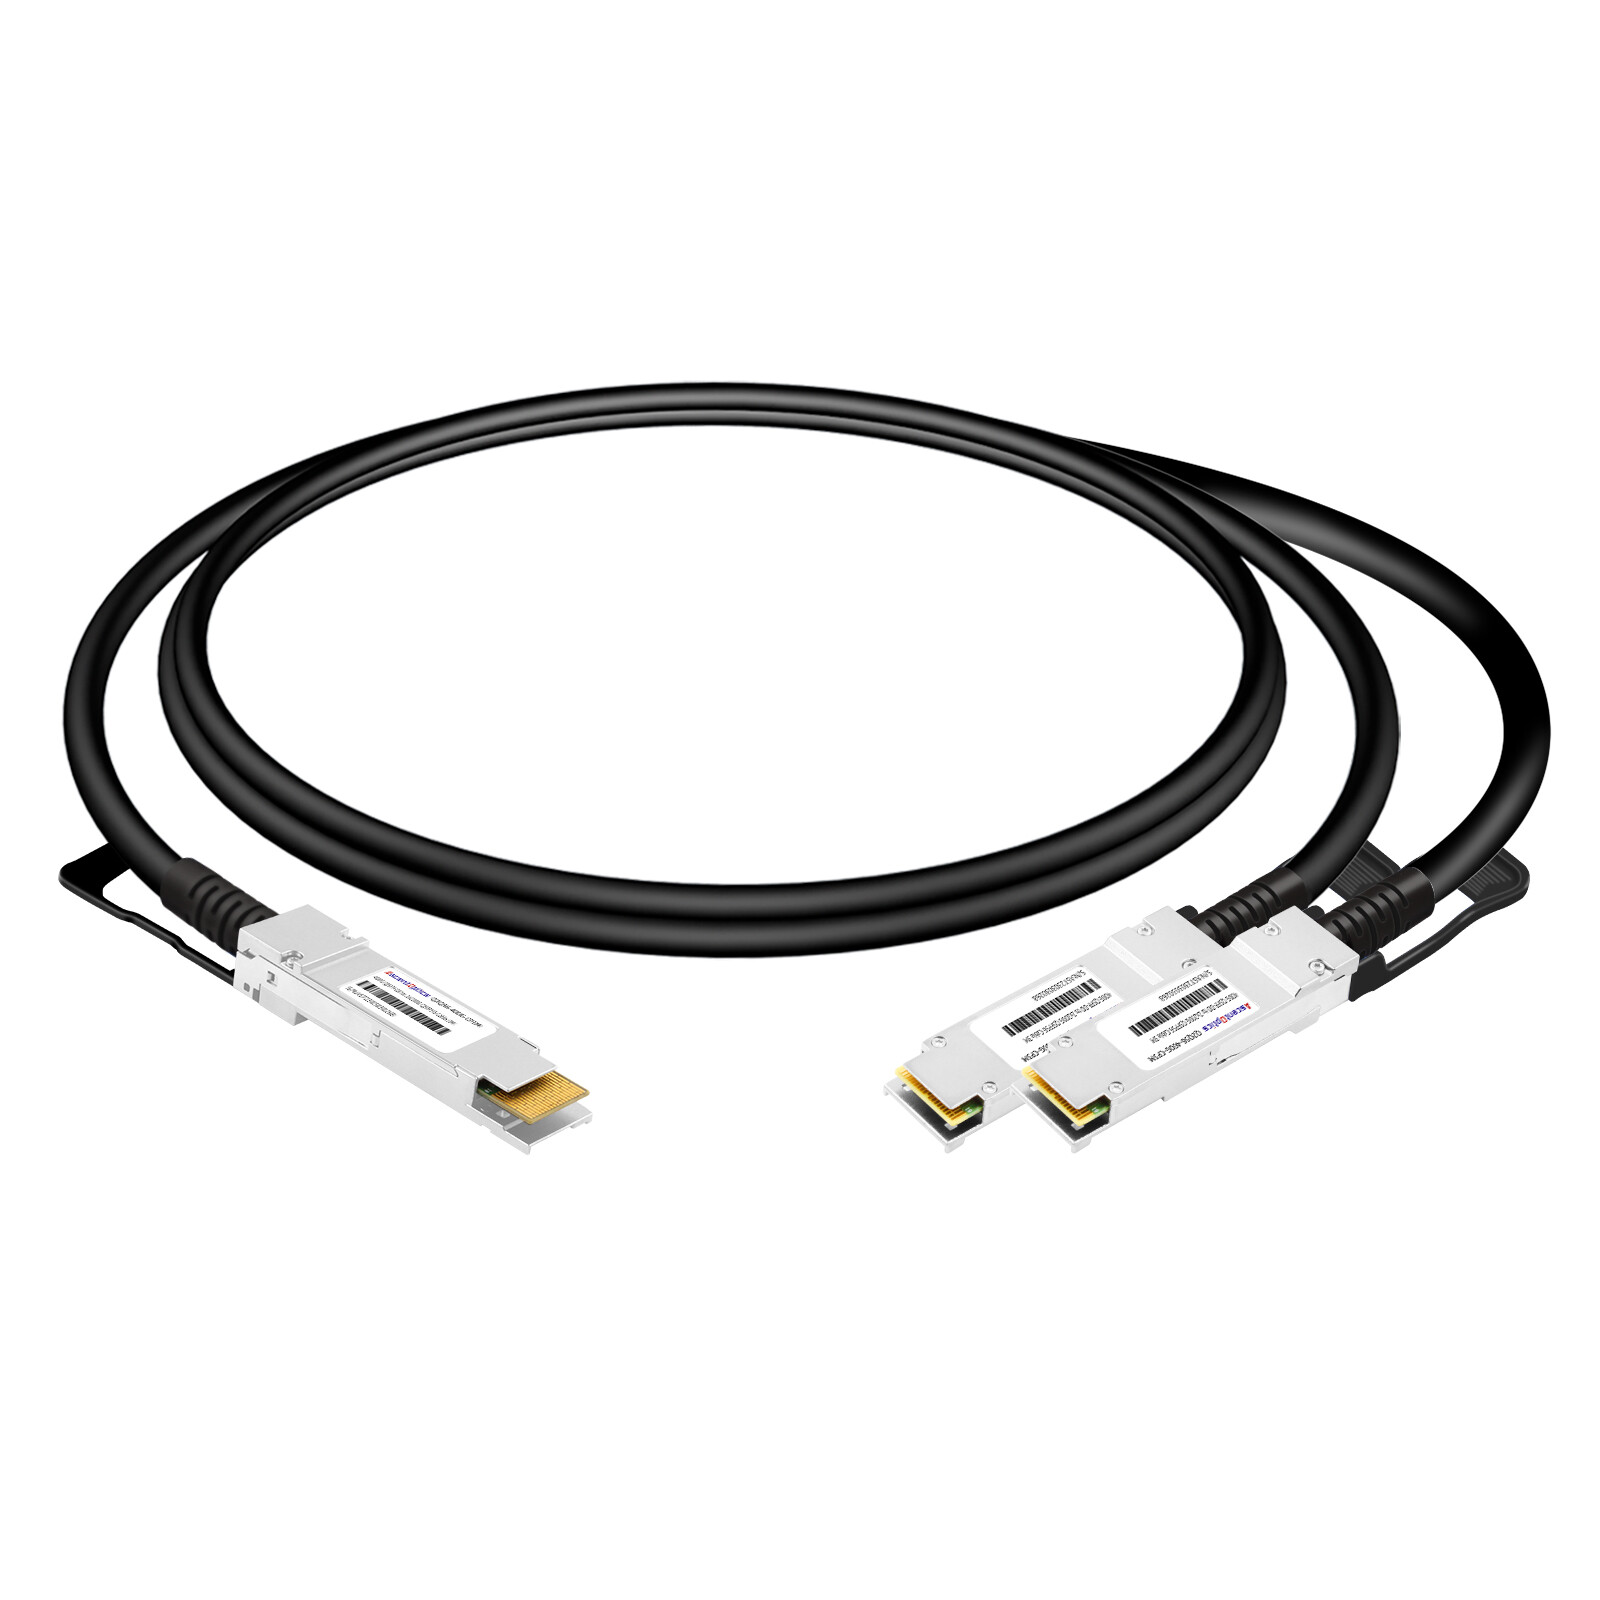 400G QSFP-DD to 2x 200G QSFP56 Copper Breakout Cable,3 Meters,Passive